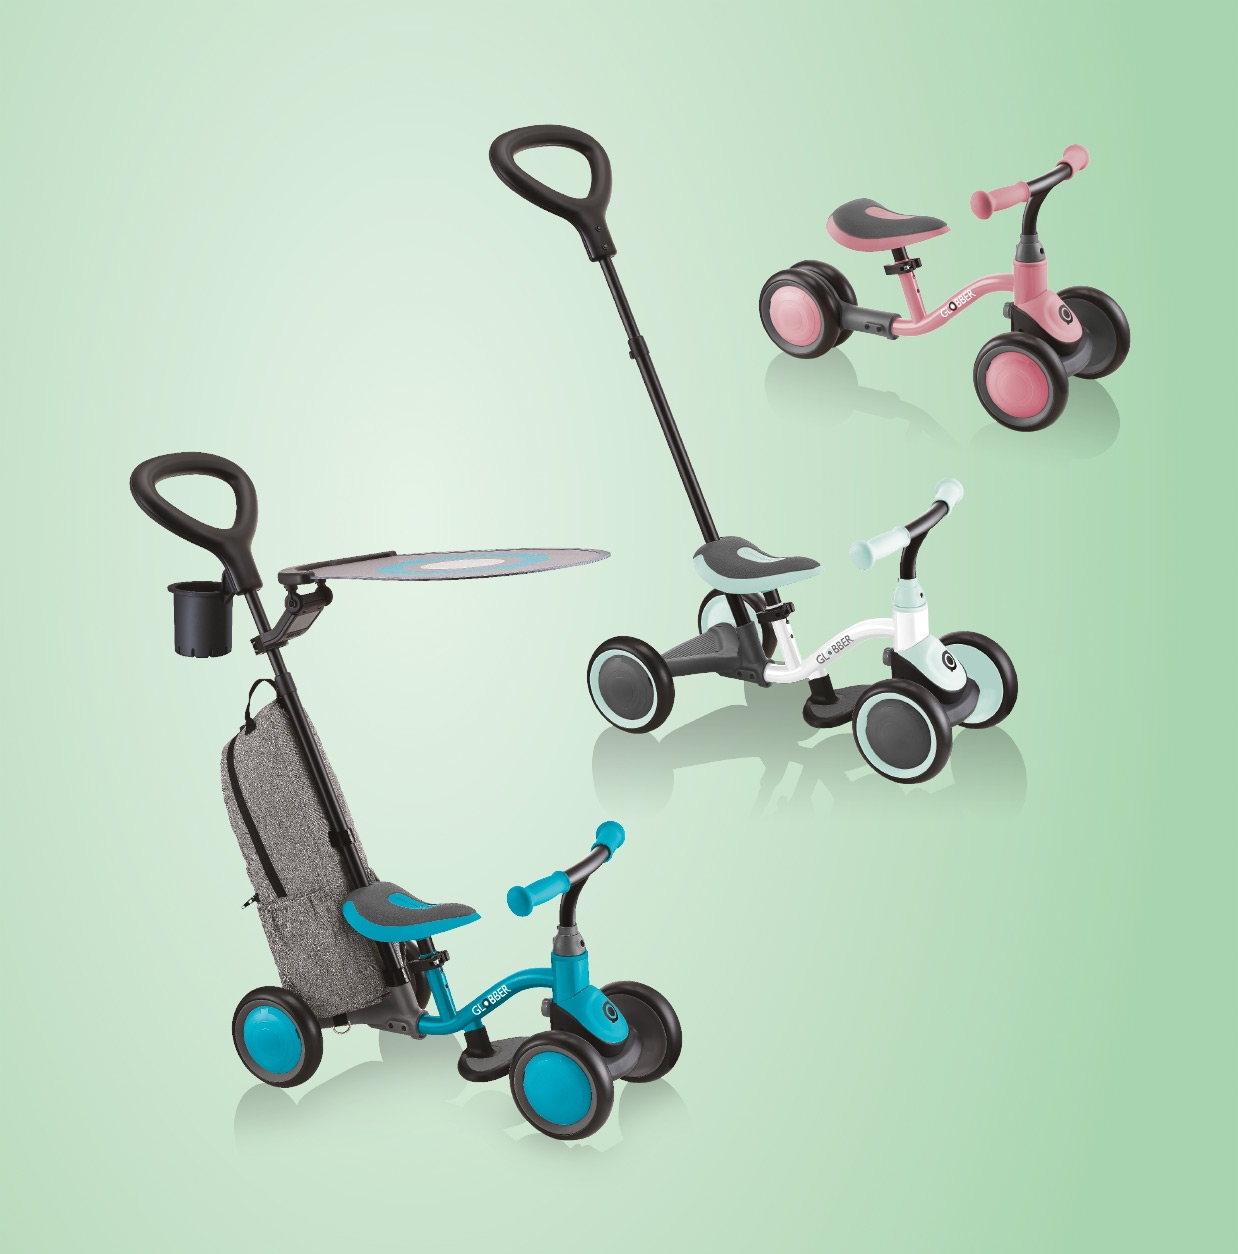 LEARNING BIKE 3 wheel balance bike series offers 3 models to choose from: LEARNING BIKE; LEARNING BIKE 3in1 with an all-in-one design; and a DELUXE baby balance bike that has accessories included